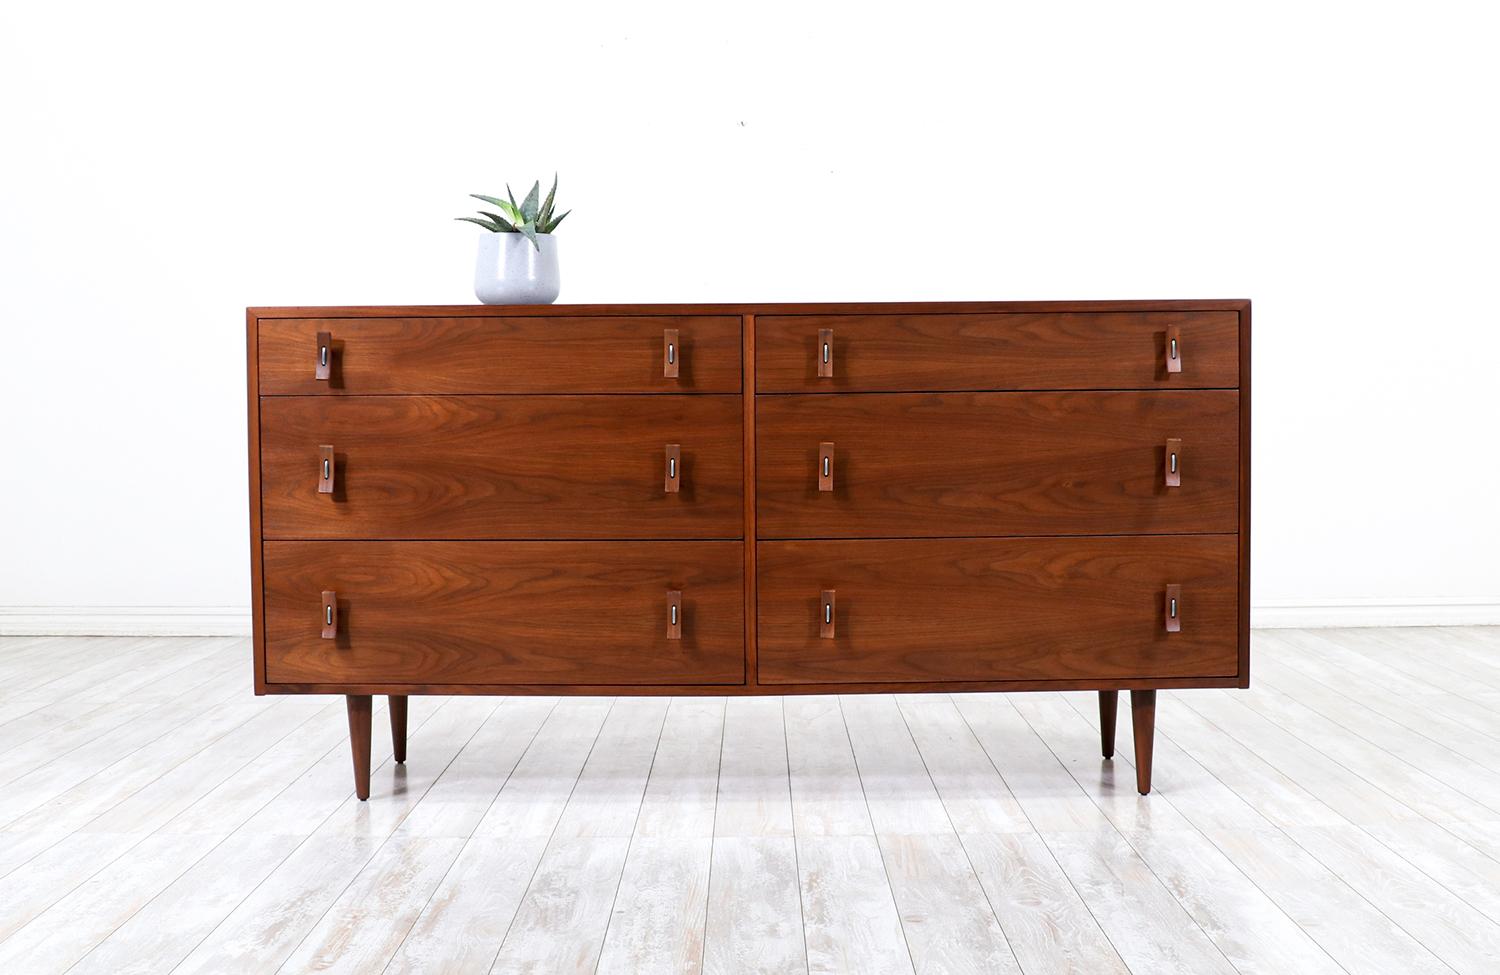 A beautiful six drawer dresser designed by Stanley Young for Glenn of California in the United States circa 1950’s. Like many of Young’s creations, this exceptional dresser features the designer’s signature bentwood and steel pulls on each of the